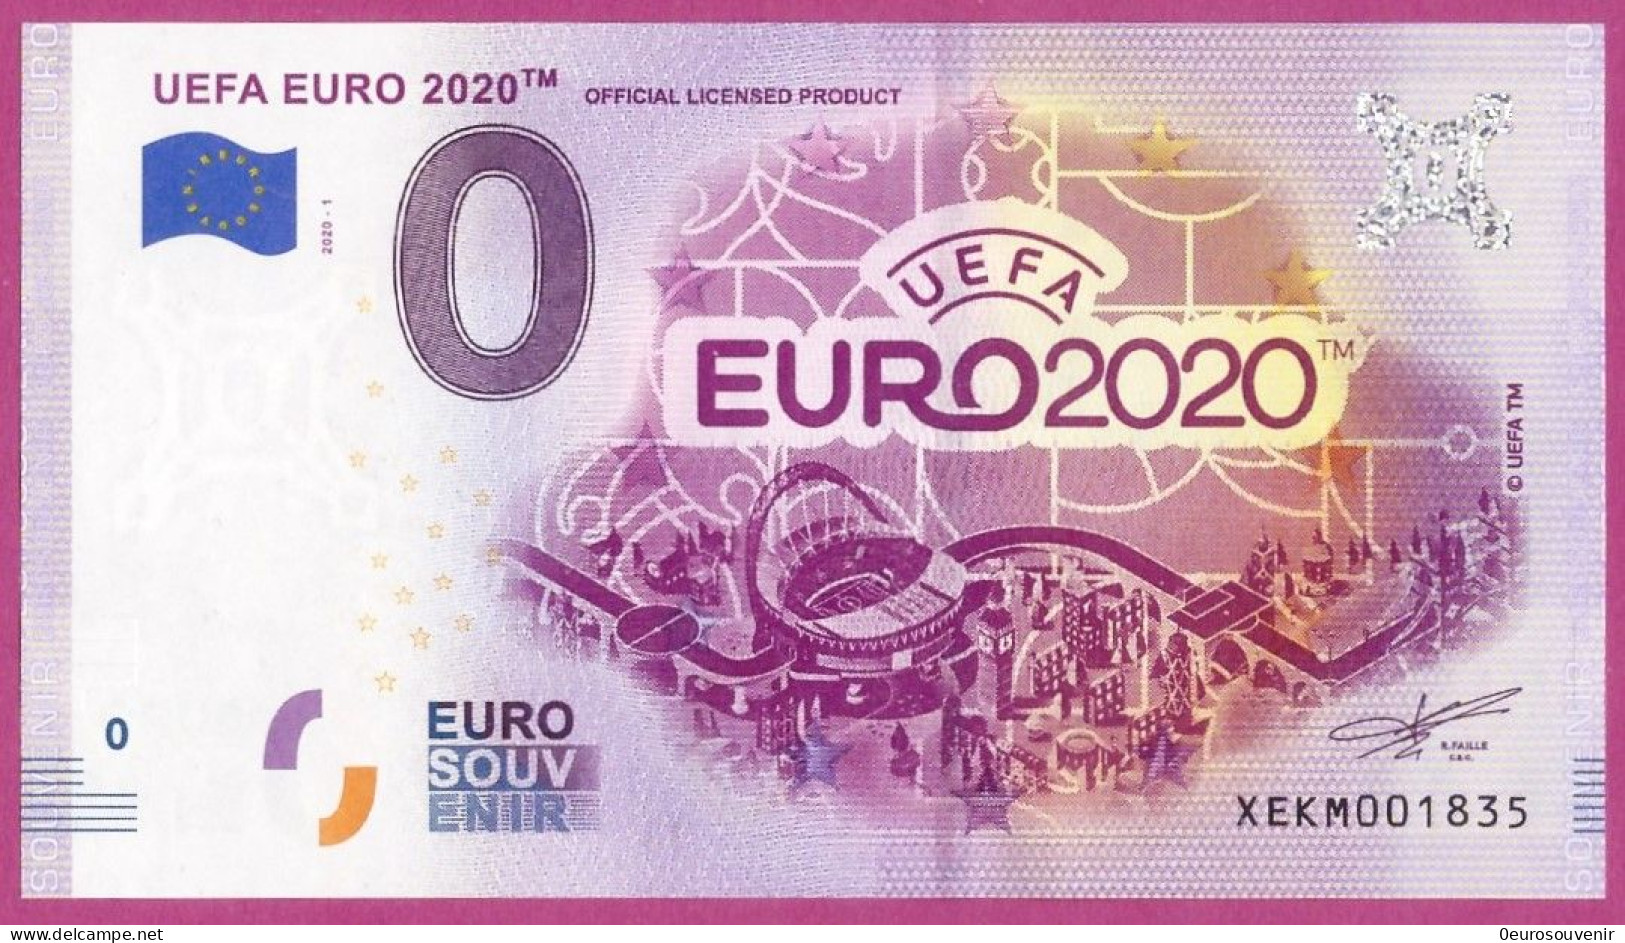 0-Euro XEKM 2020-1 /1 UEFA EURO 2020 - OFFICIAL LICENSED PRODUCT - Privatentwürfe